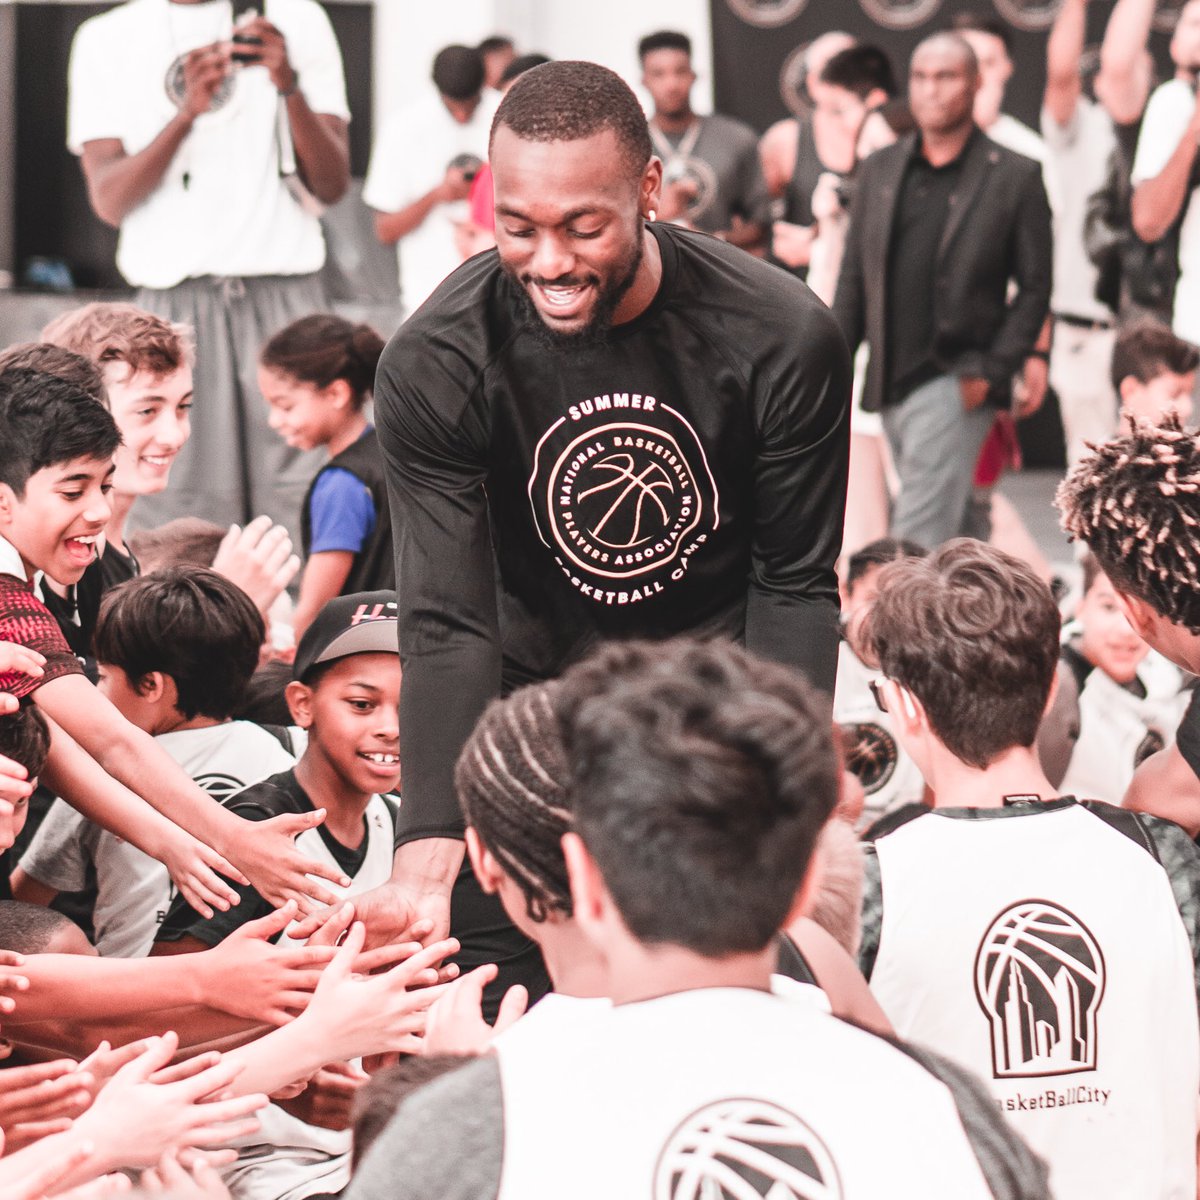 All smiles with Cardiac Kemba at today’s #NBPACamp in New York City! https://t.co/271ewATsaT